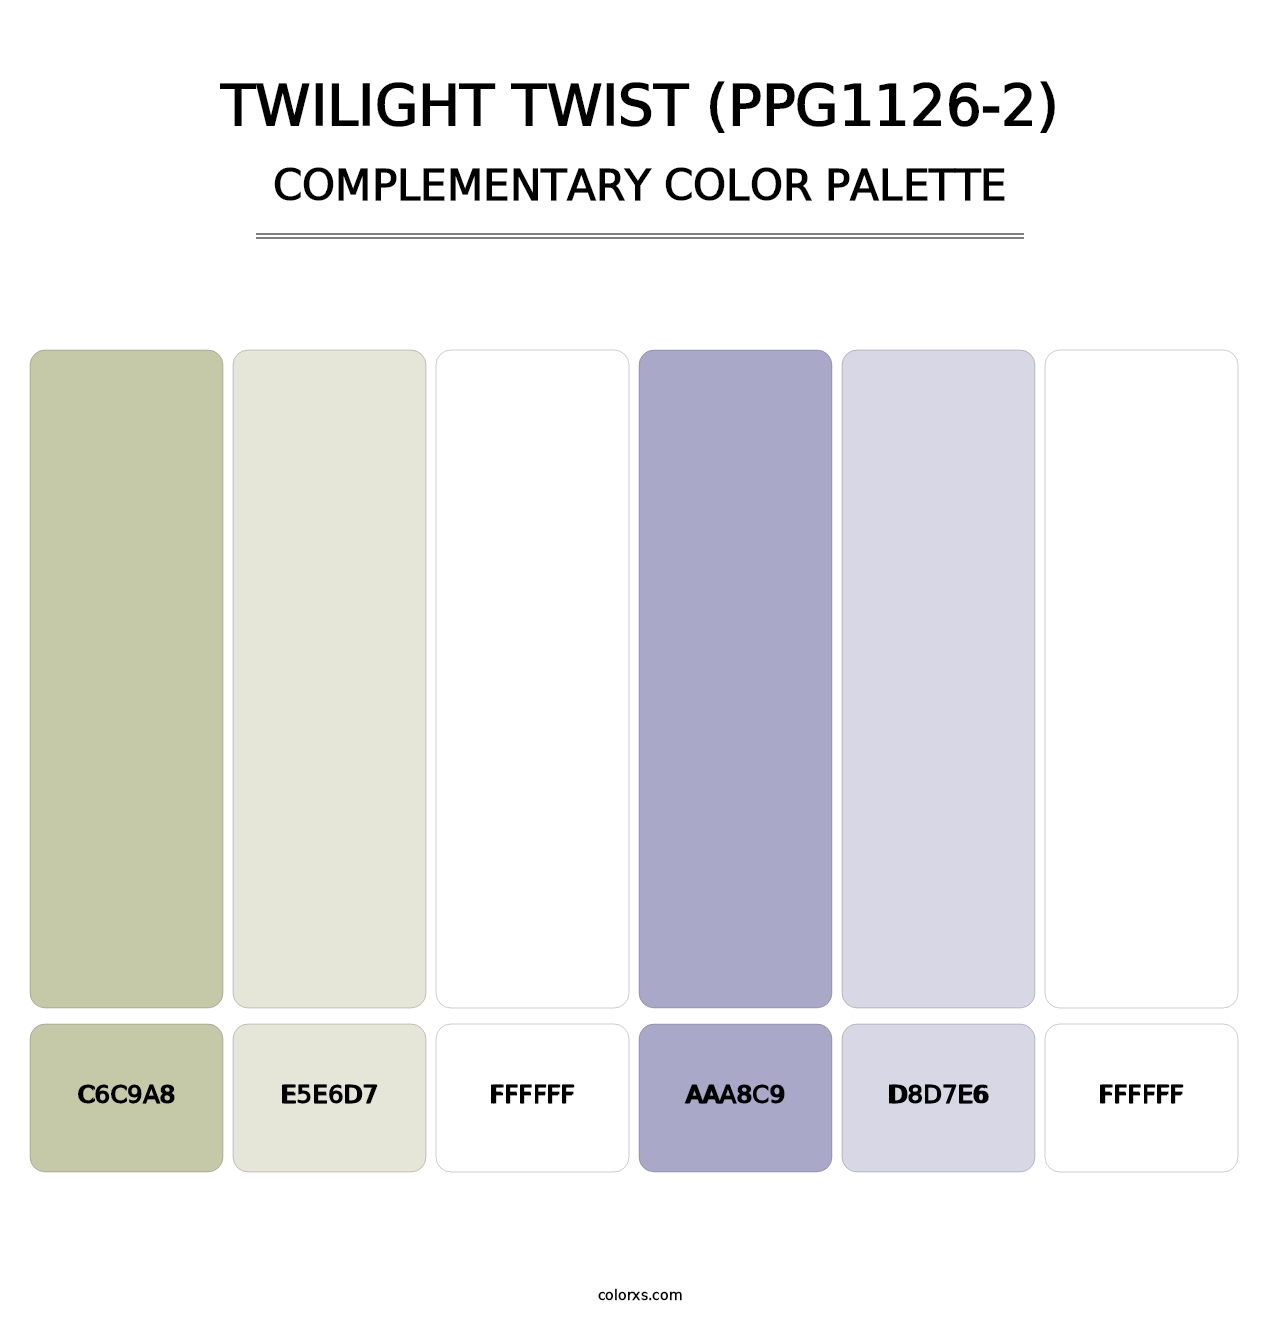 Twilight Twist (PPG1126-2) - Complementary Color Palette